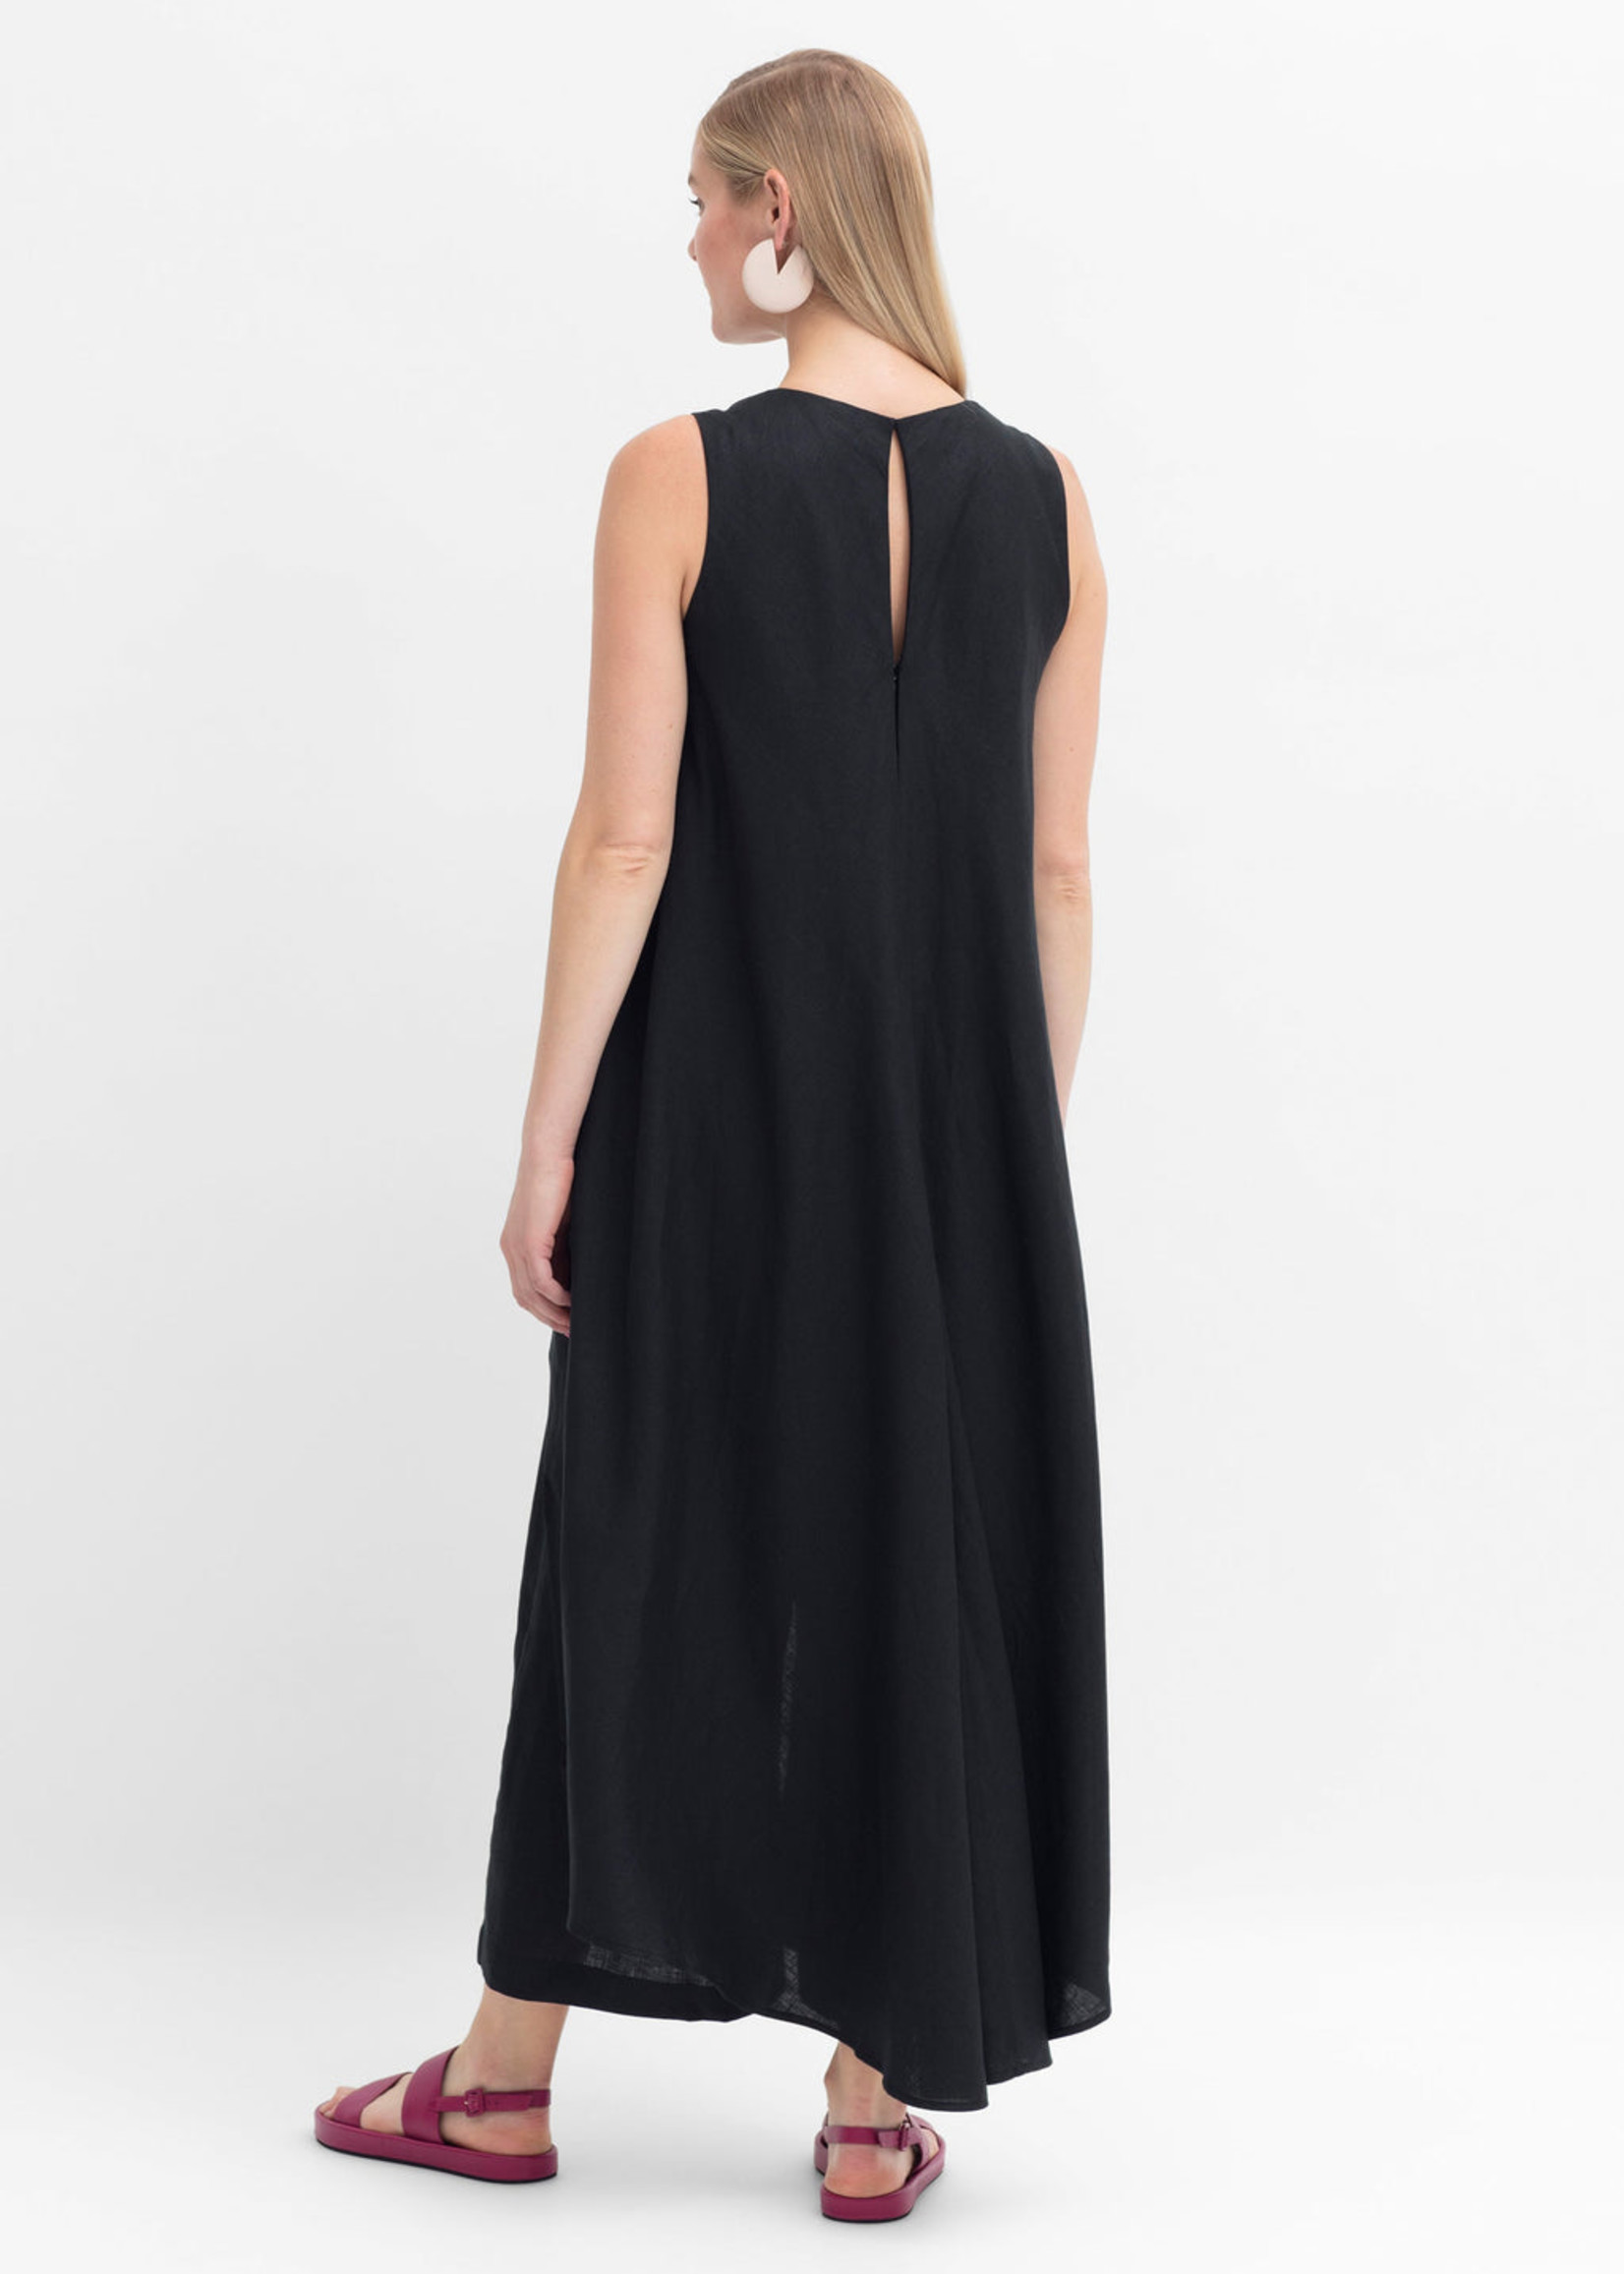 Neza Jumpsuit Black by Elk the Label - Angove Street Collective